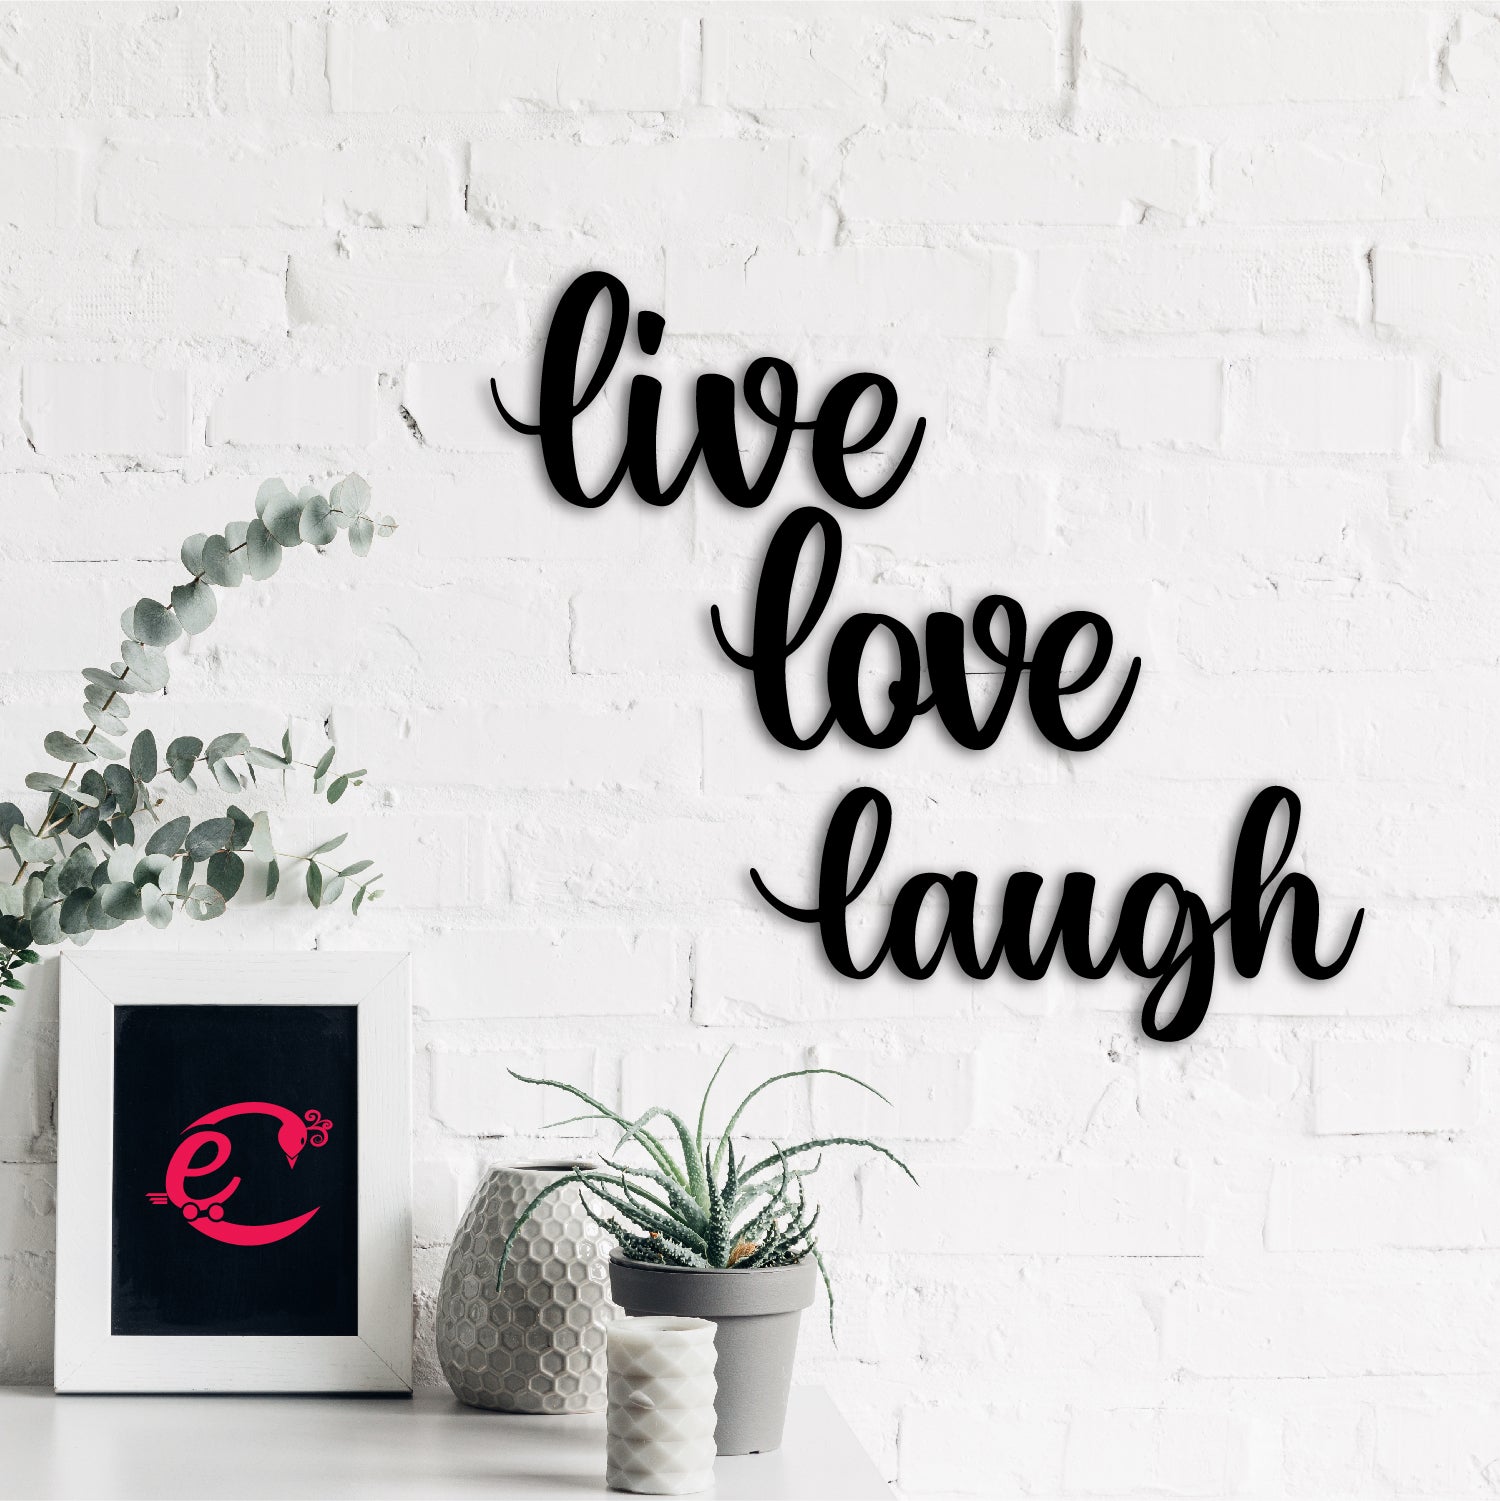 "Live Love Laugh" Black MDF Engineered Wooden Wall Art/Hanging Cutout for Home Decor